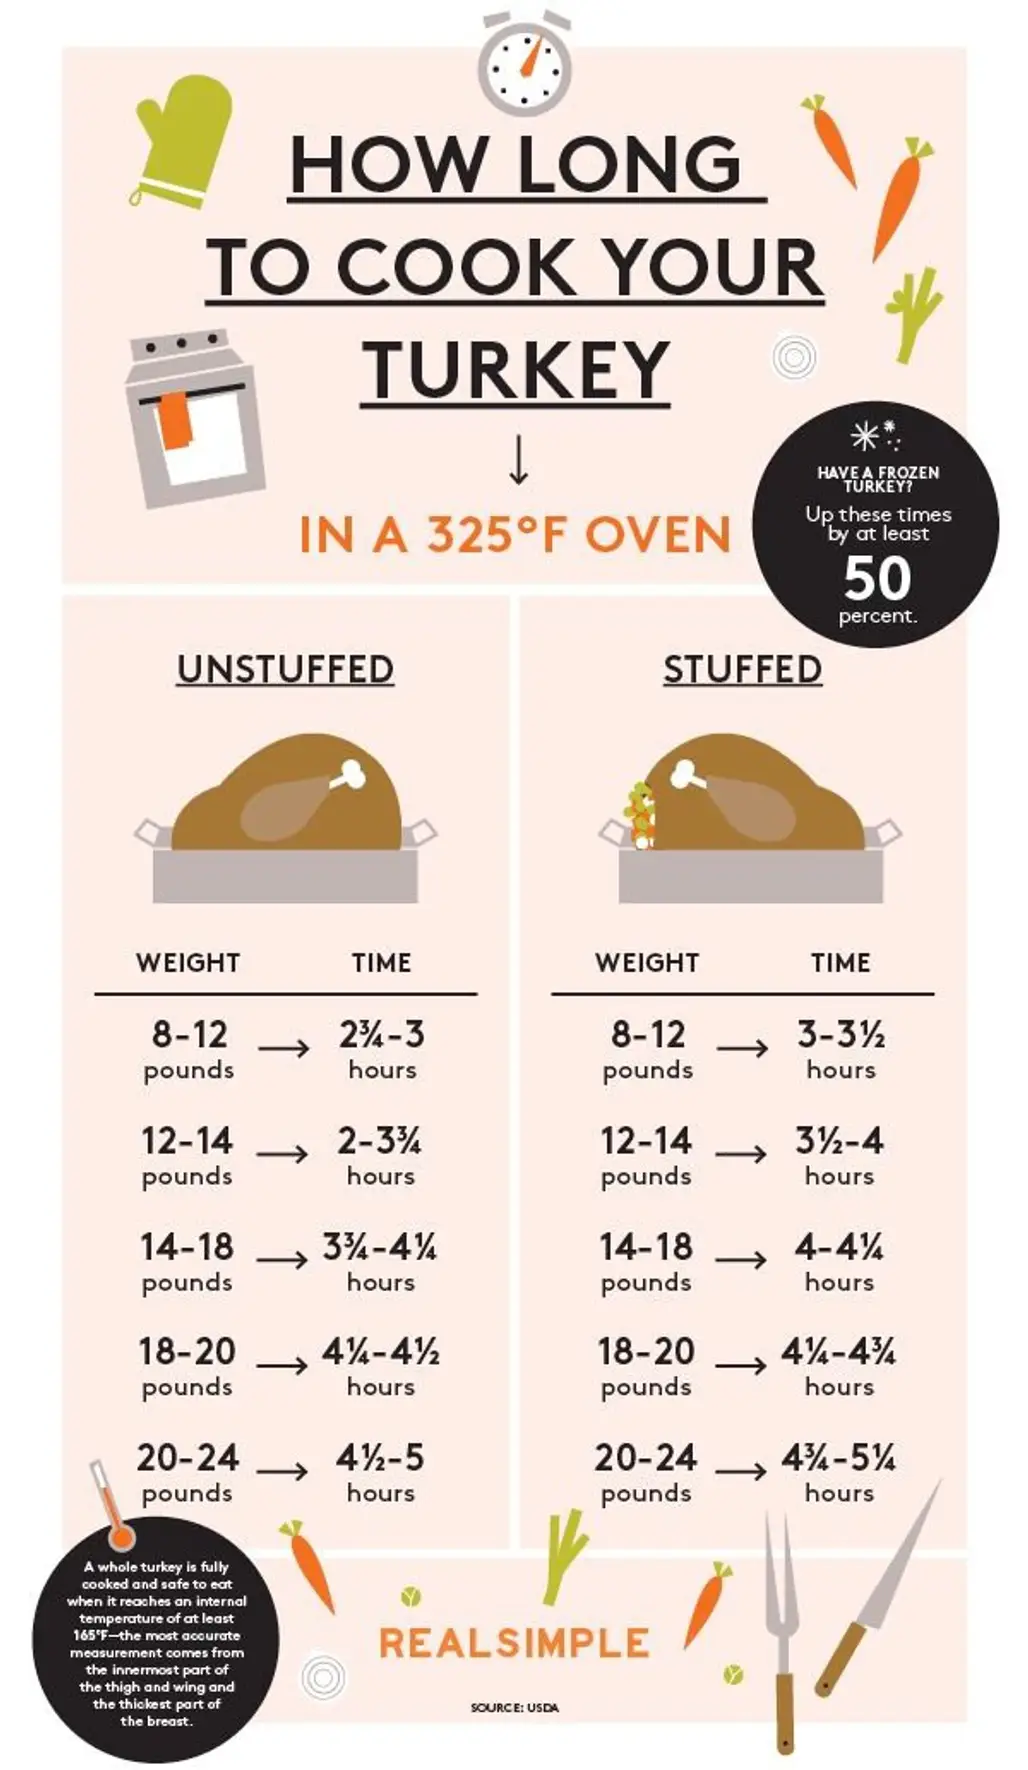 How Long to Cook Your Turkey